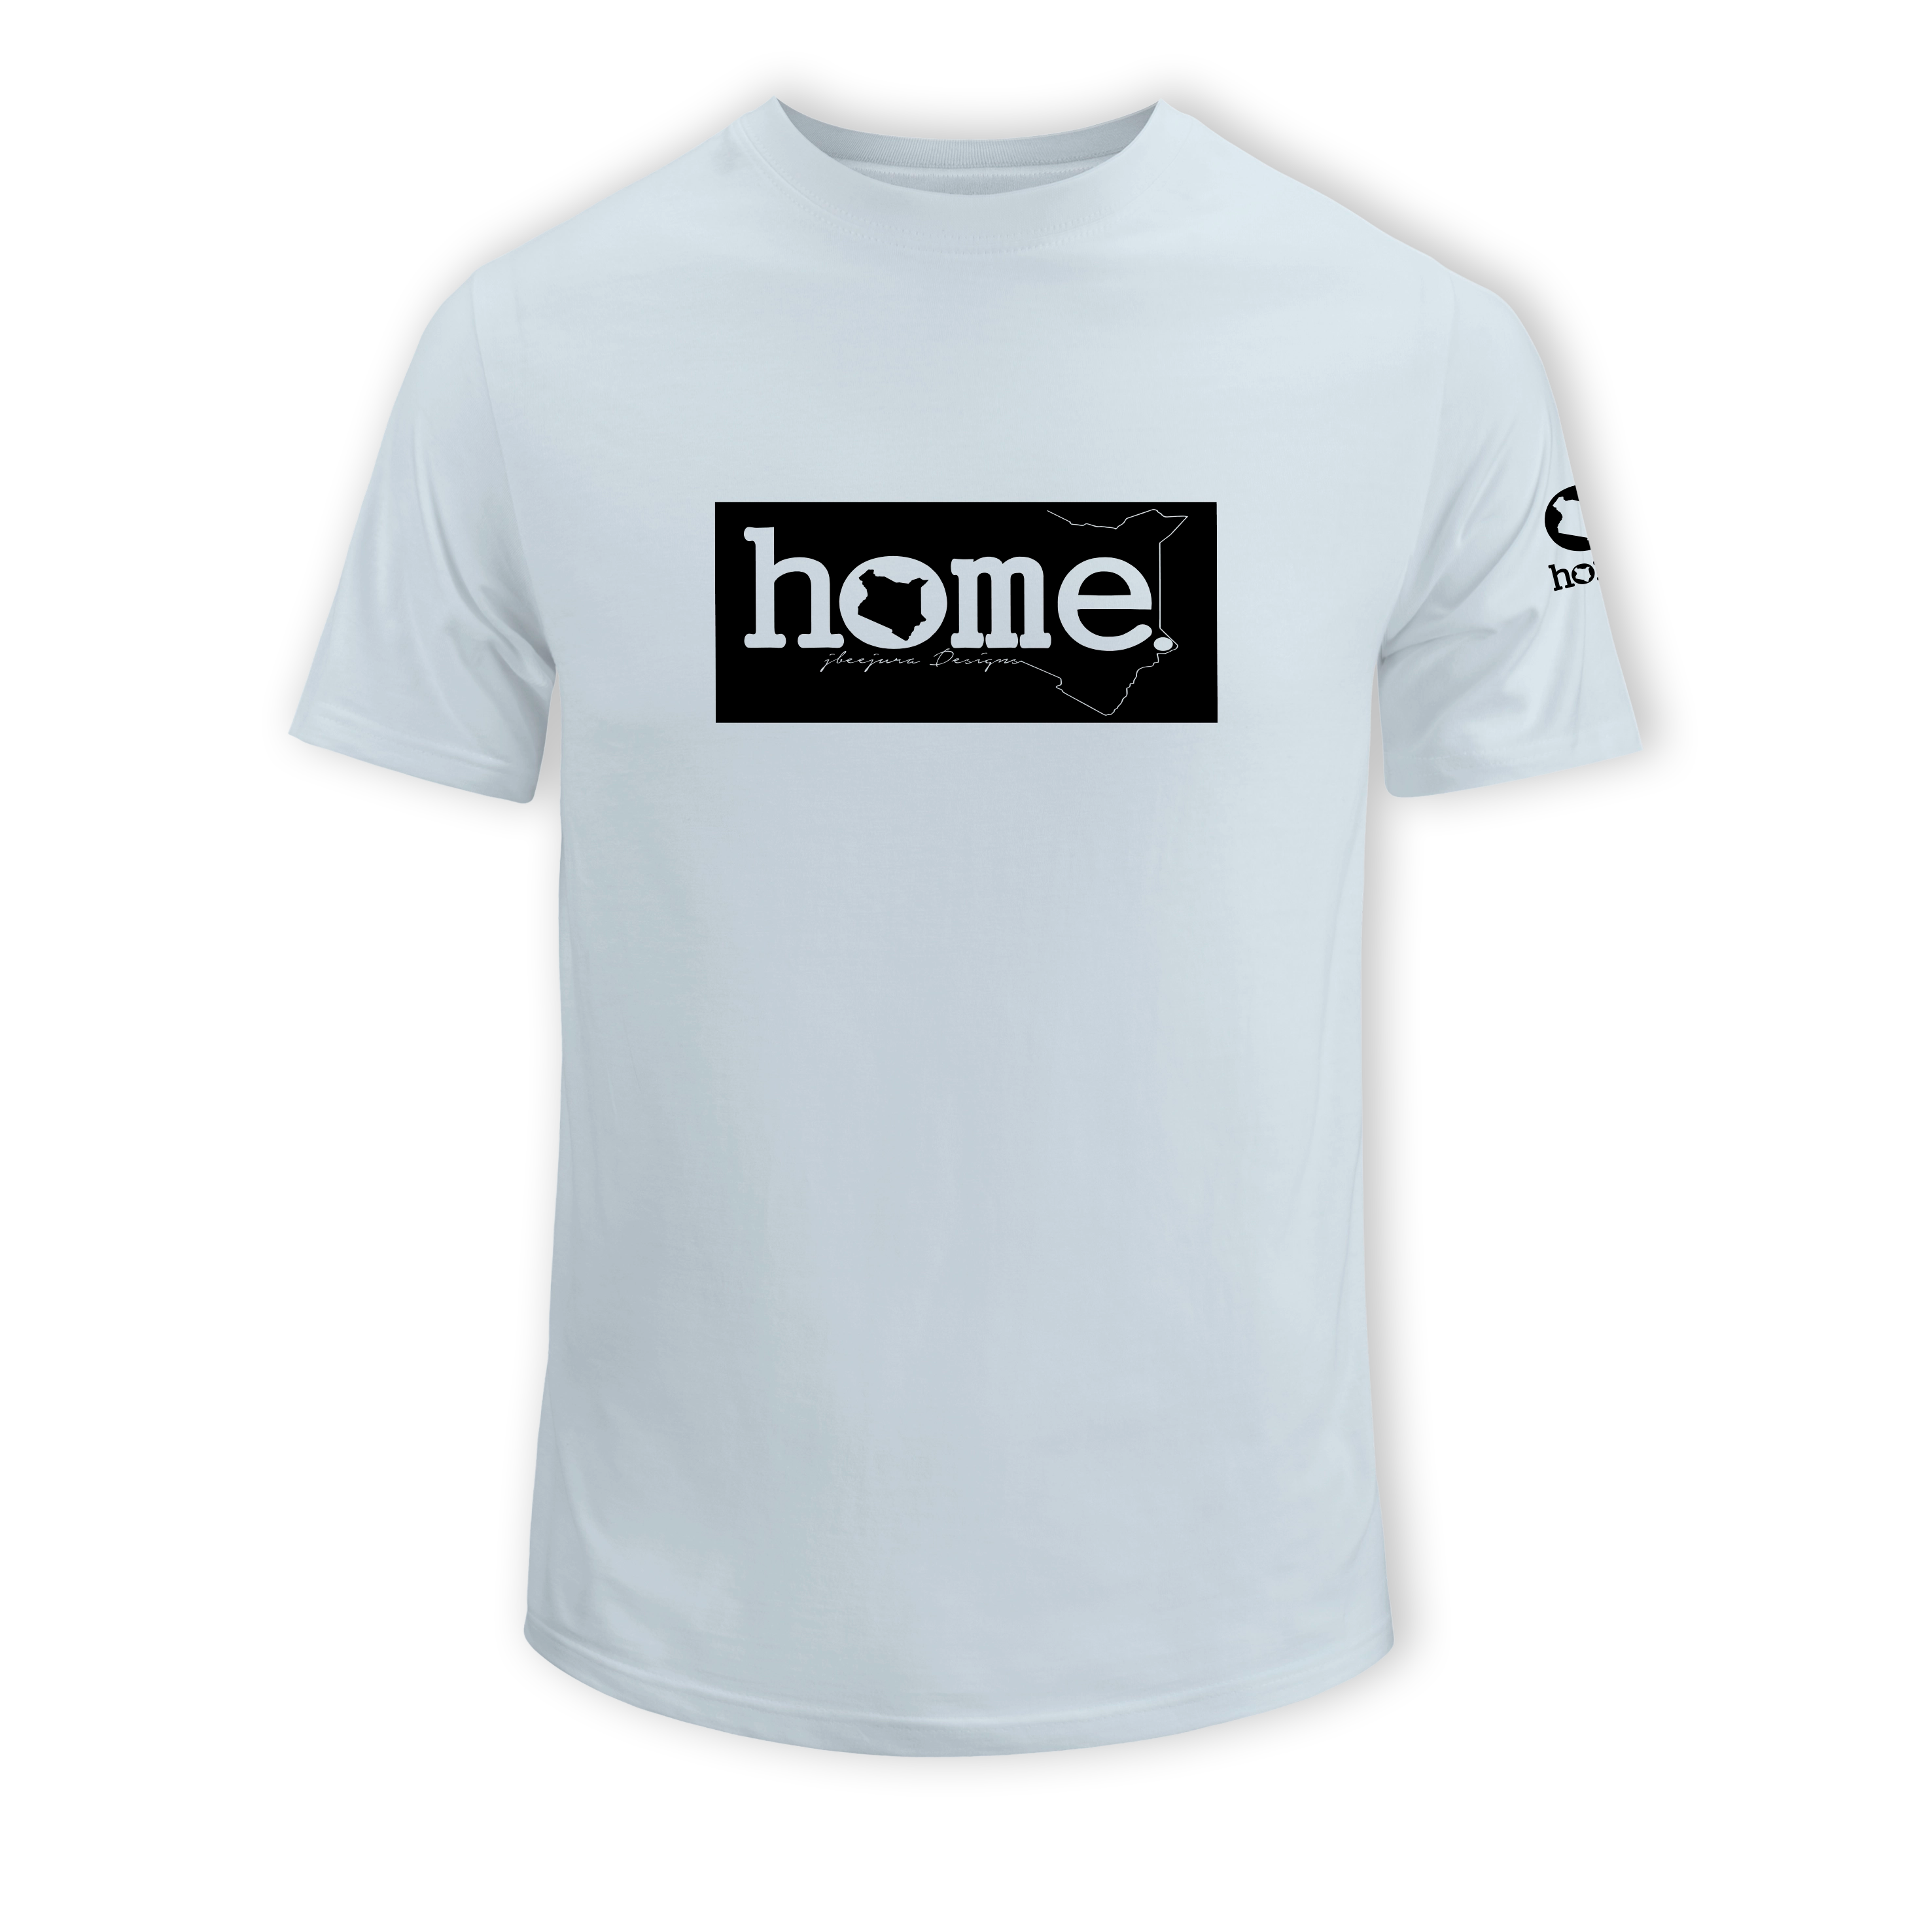 home_254 SHORT-SLEEVED SKY-BLUE T-SHIRT WITH A BLACK CLASSIC PRINT – COTTON PLUS FABRIC